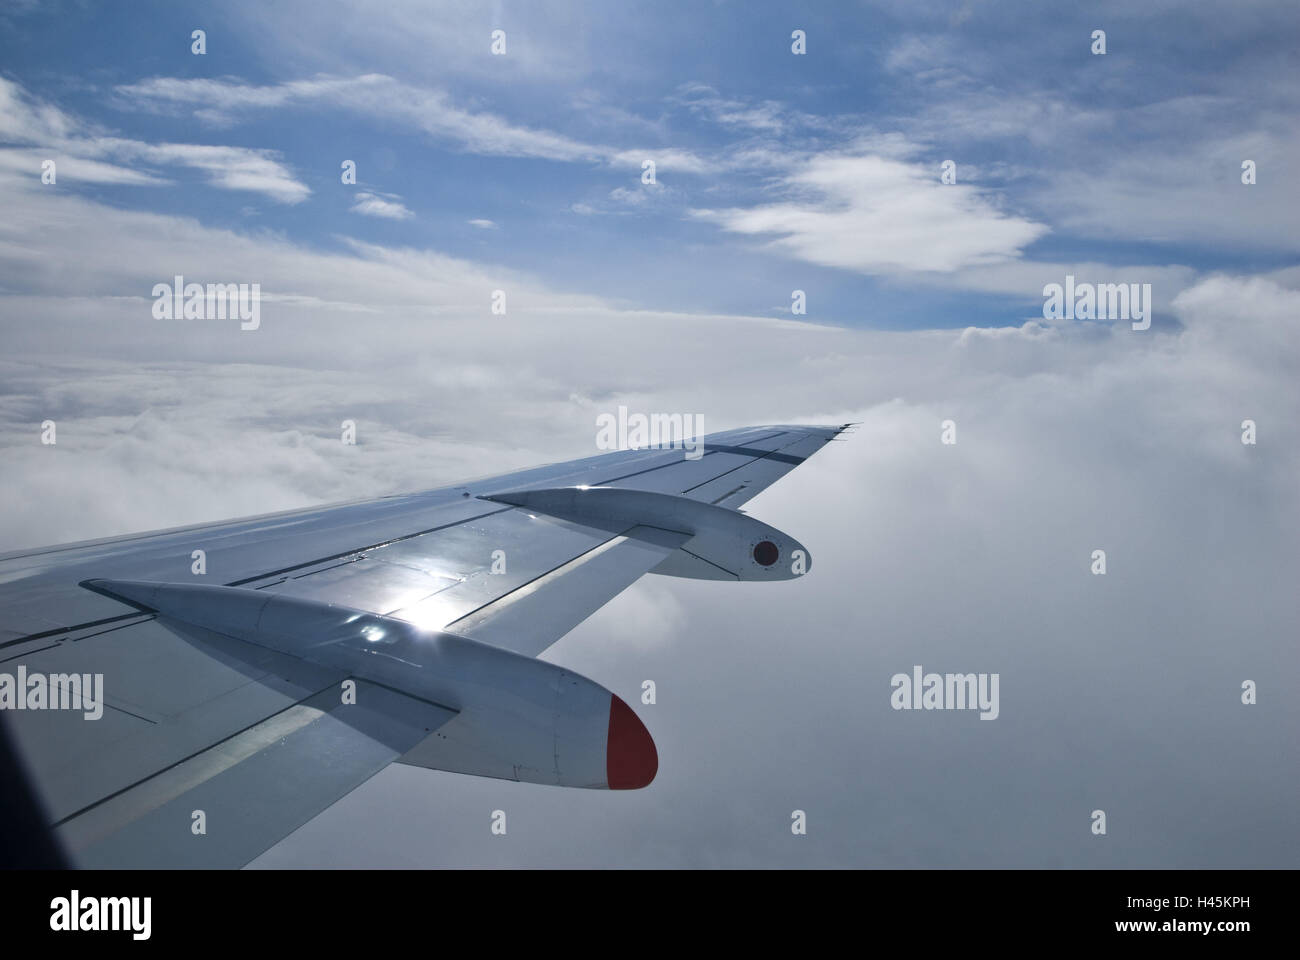 Airplane, detail, wing, clouds, aerofoil, Stock Photo